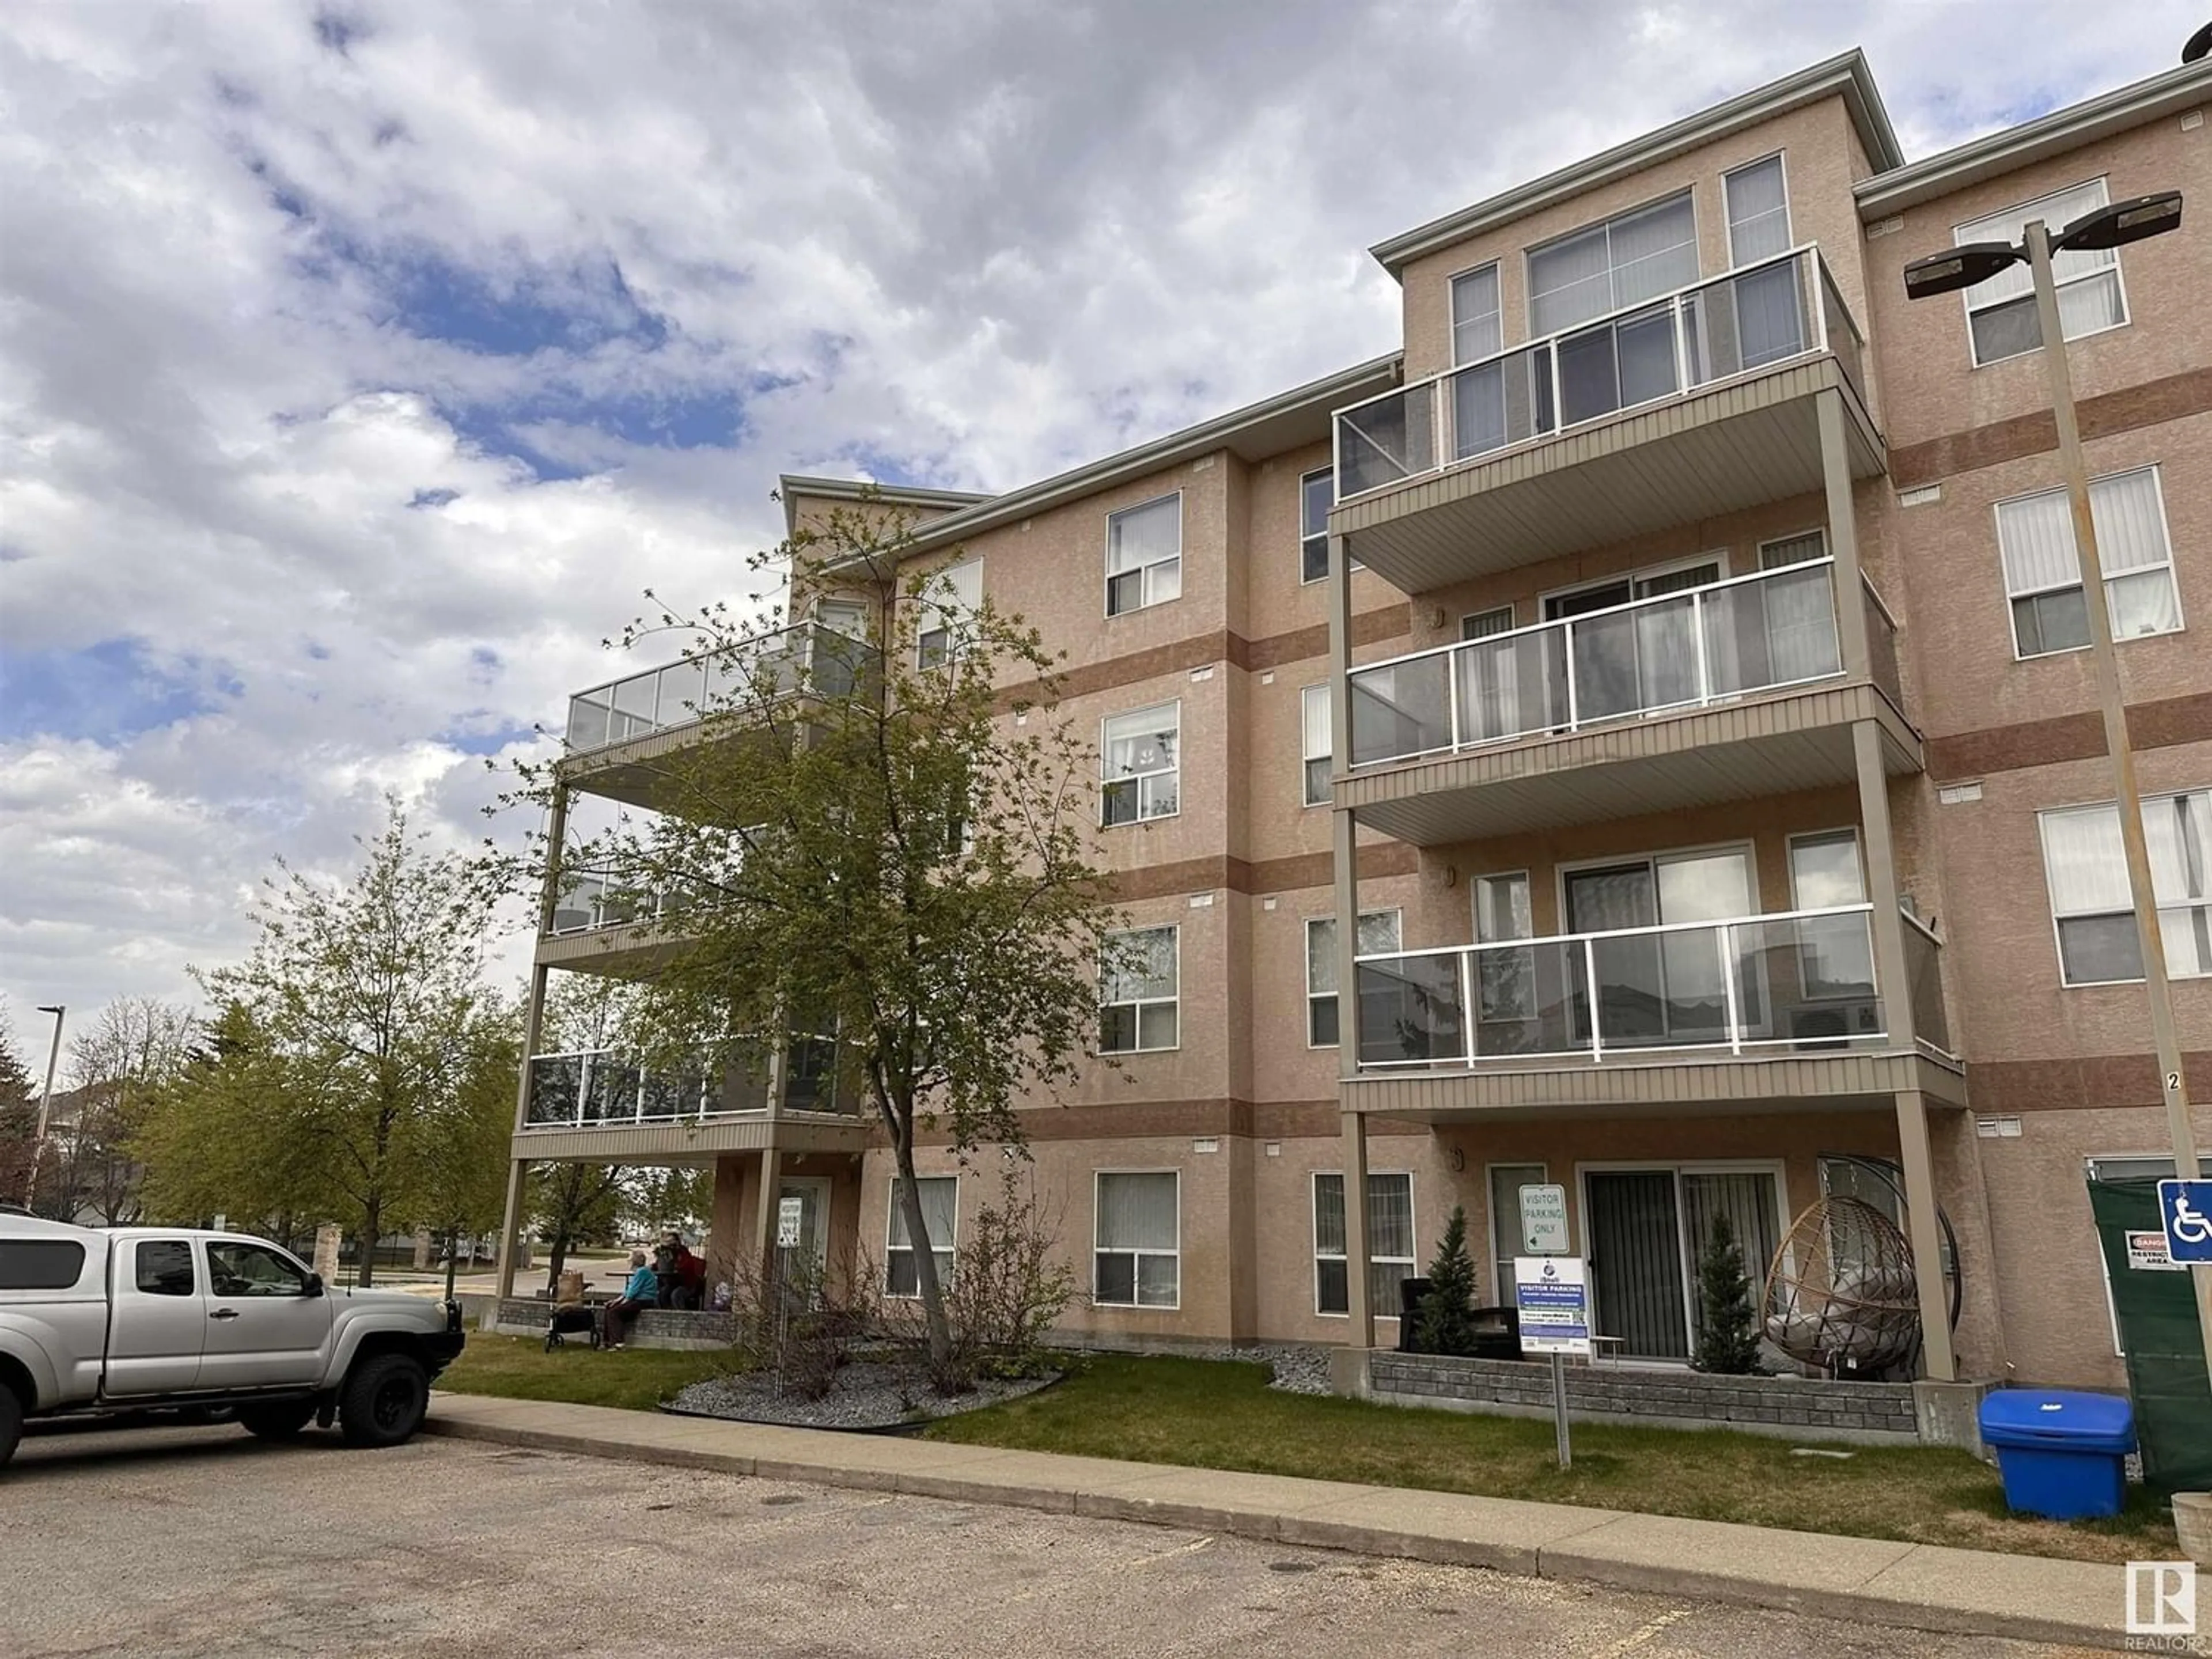 A pic from exterior of the house or condo for #133 9704 174 ST NW, Edmonton Alberta T5T6J4